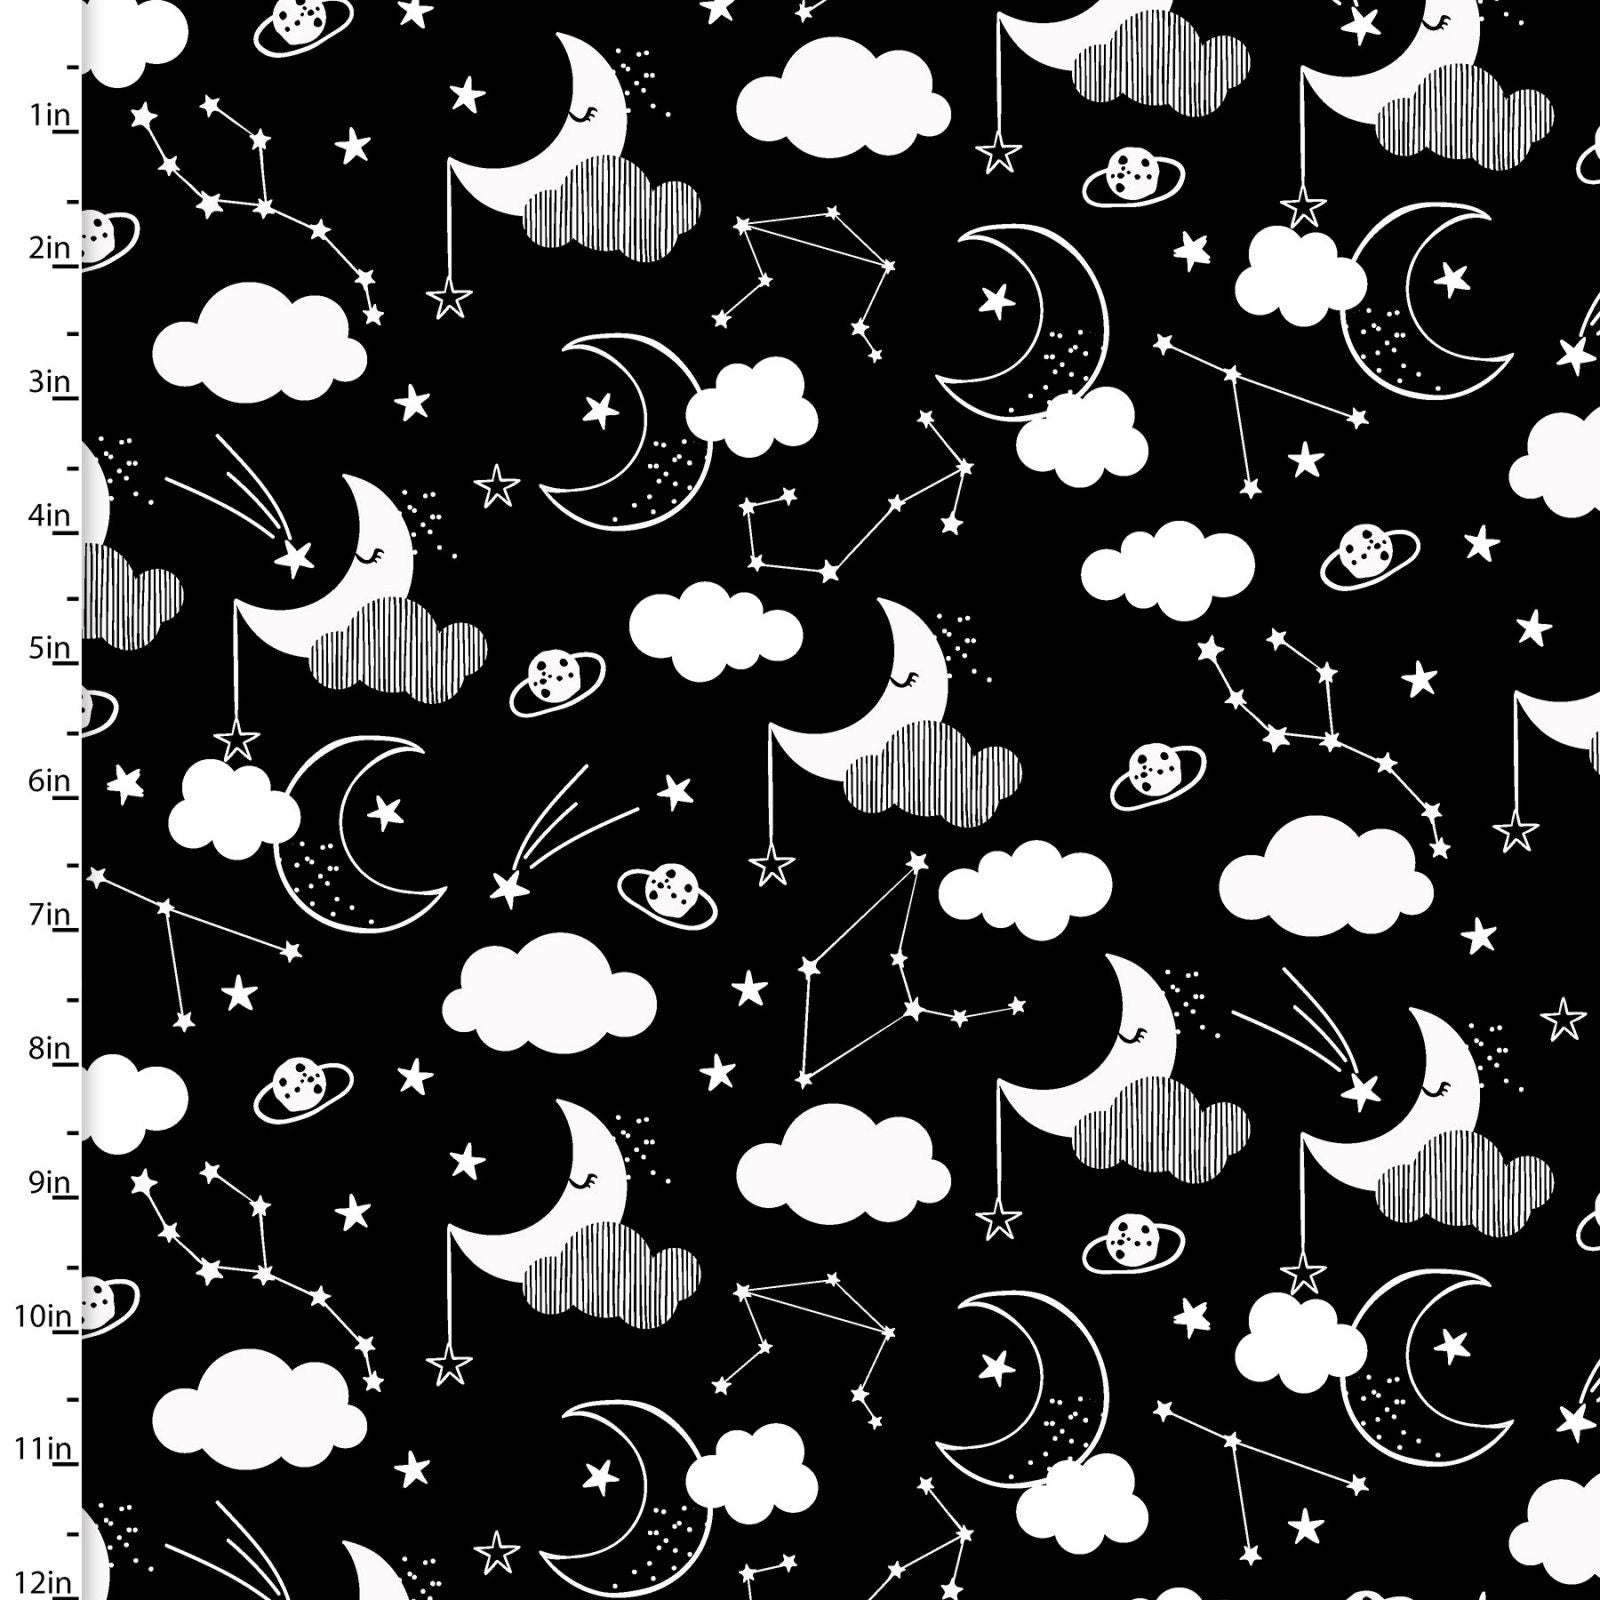 Black moon and stars nursery flannel cotton fabric - Night Sky by 3 Wishes